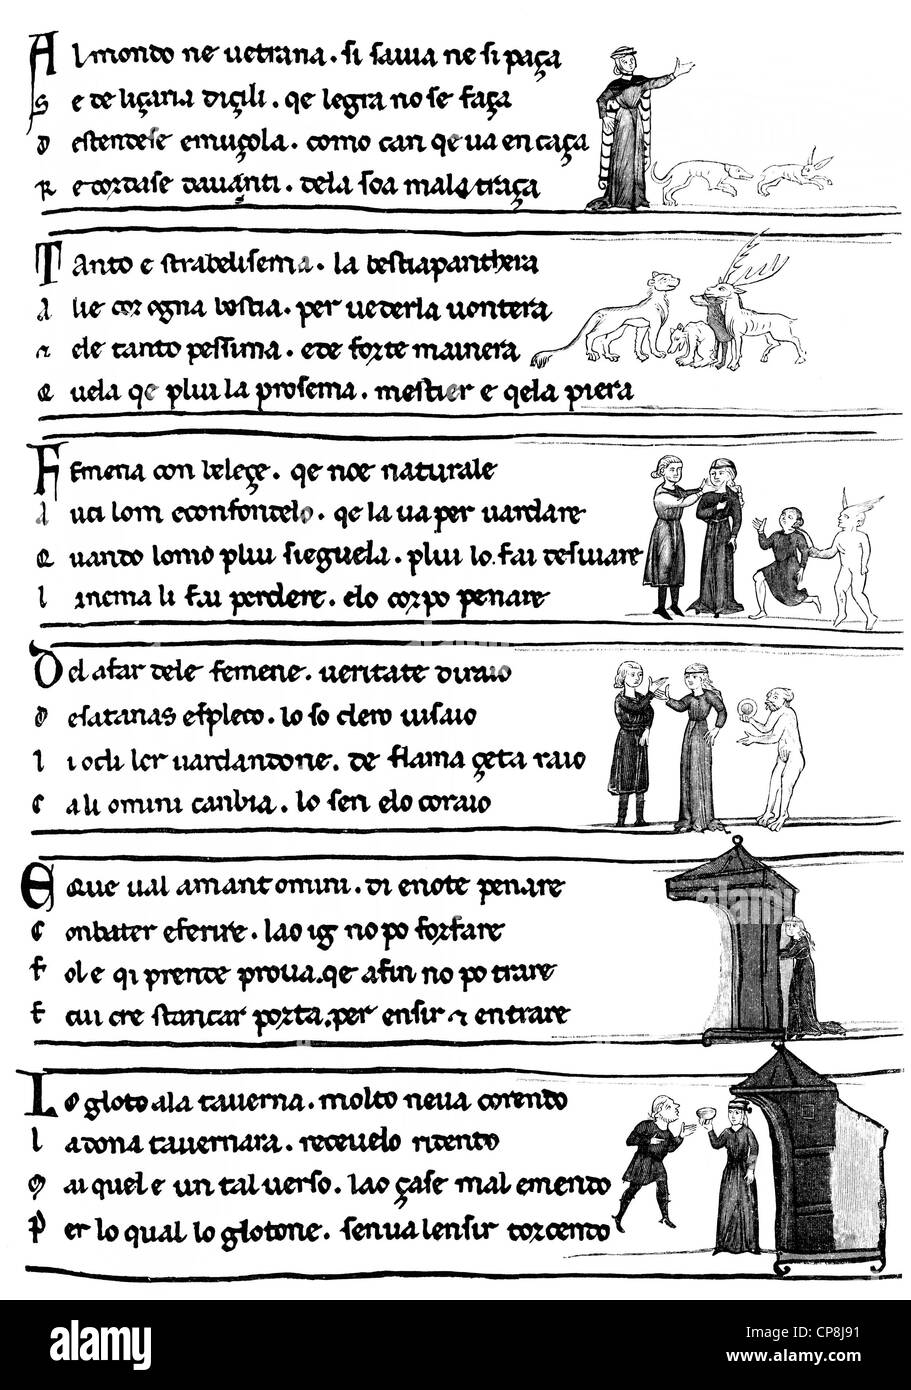 Historical illustration from the 19th Century, a page from Sayings about the nature of women, Latin text from the 13th Century, Stock Photo